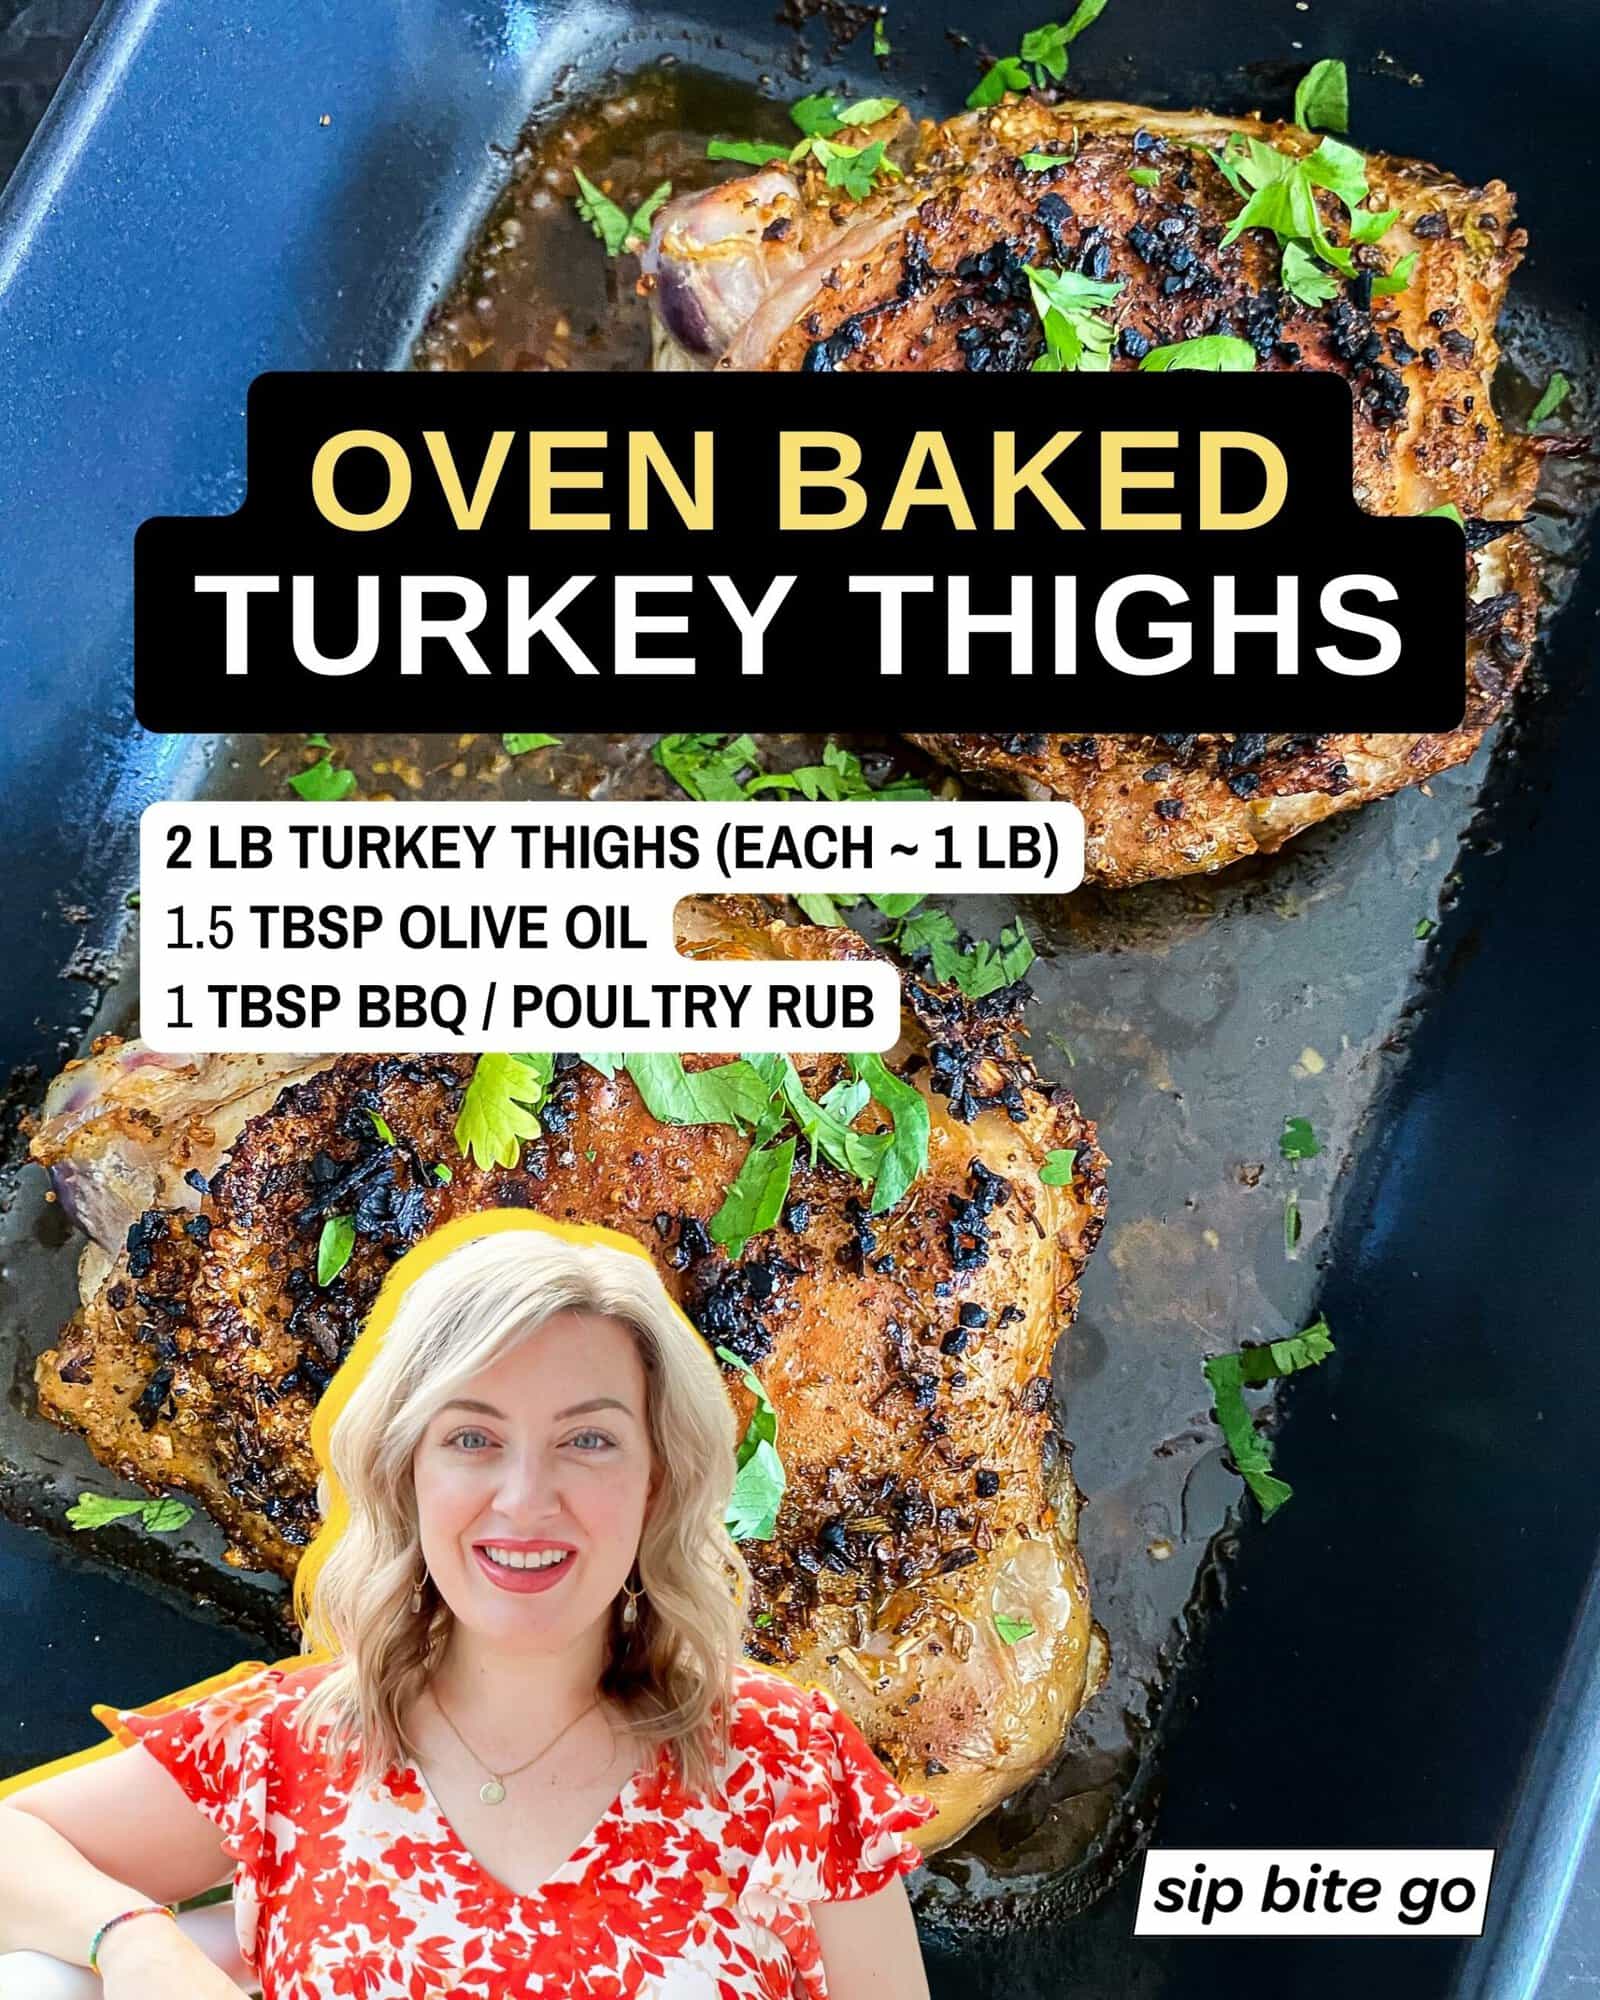 Infographic with recipe ingredients for roasting oven baked turkey thighs with jenna passaro food blogger